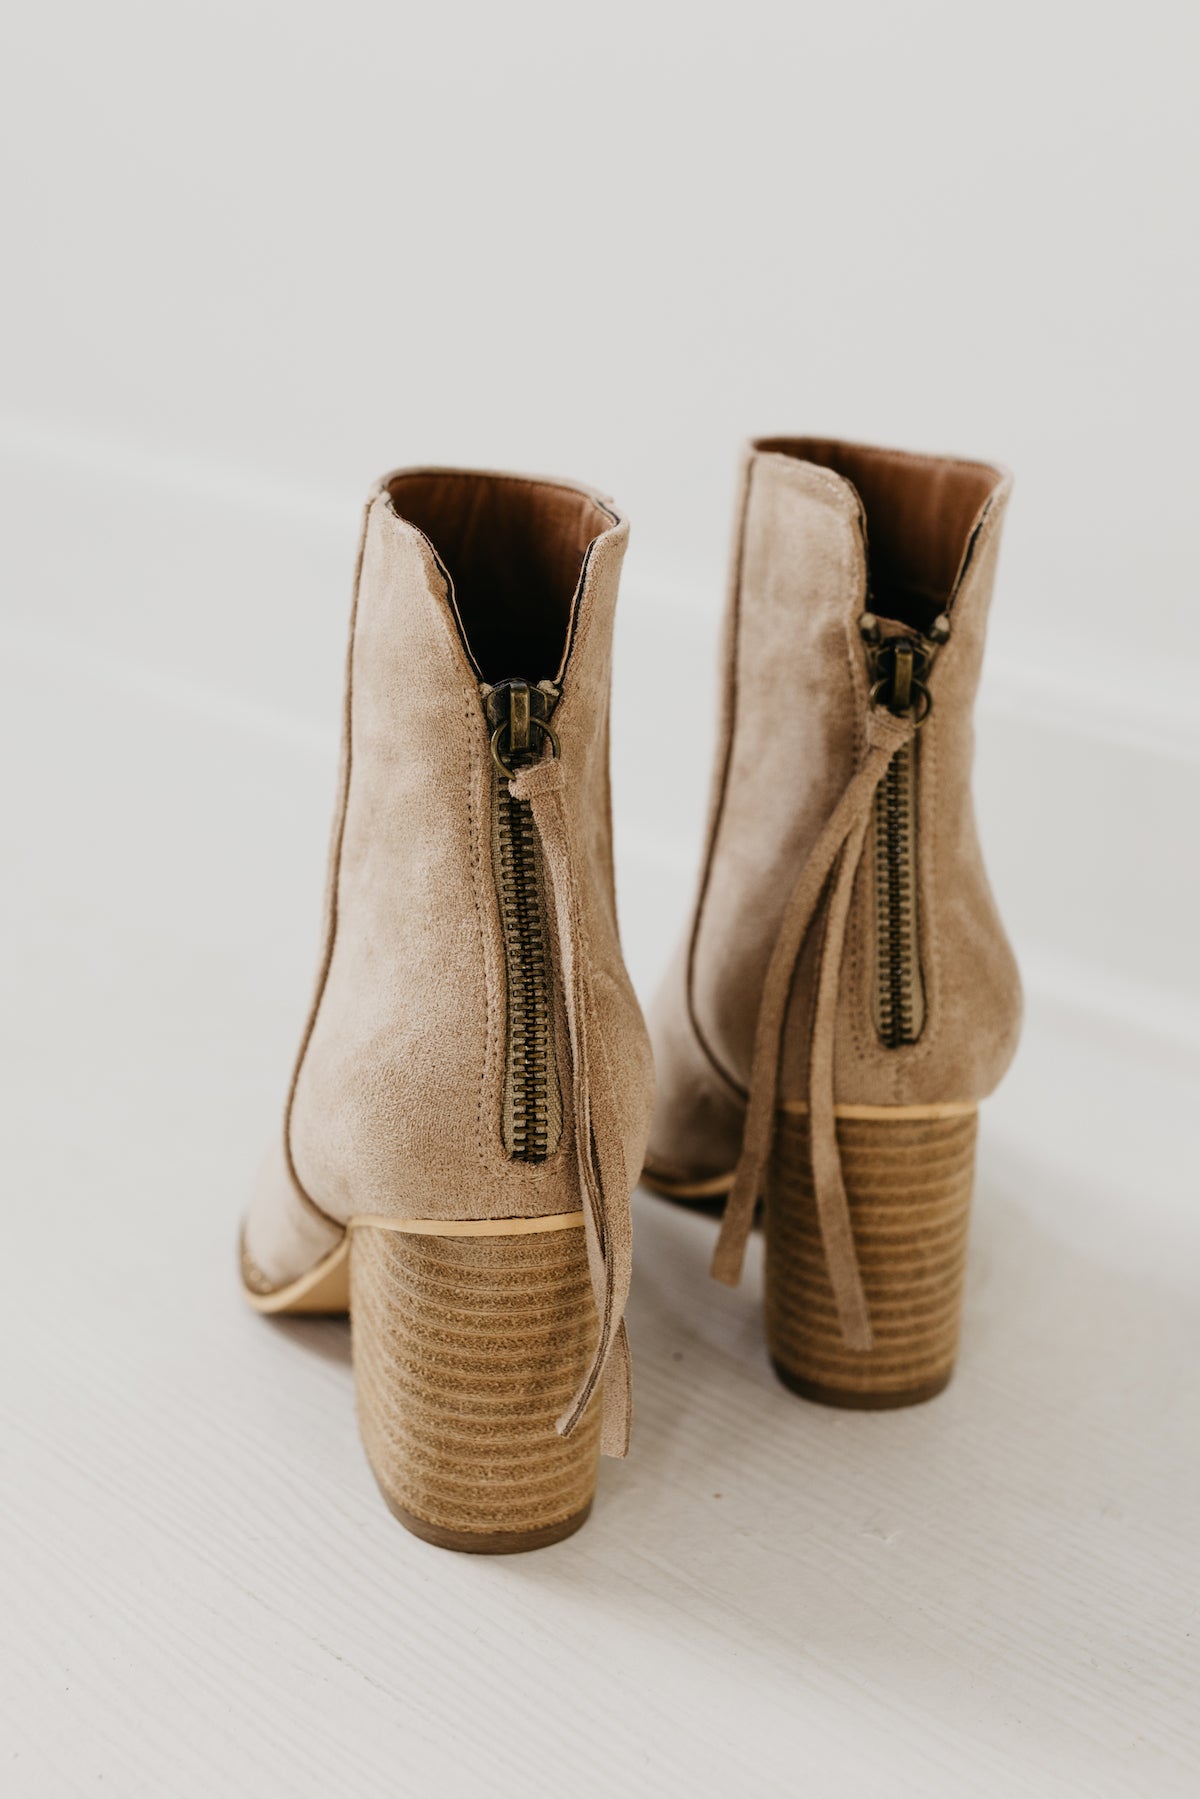 The Weslee Zipper Back Studded Bootie | Taupe  - FINAL SALE